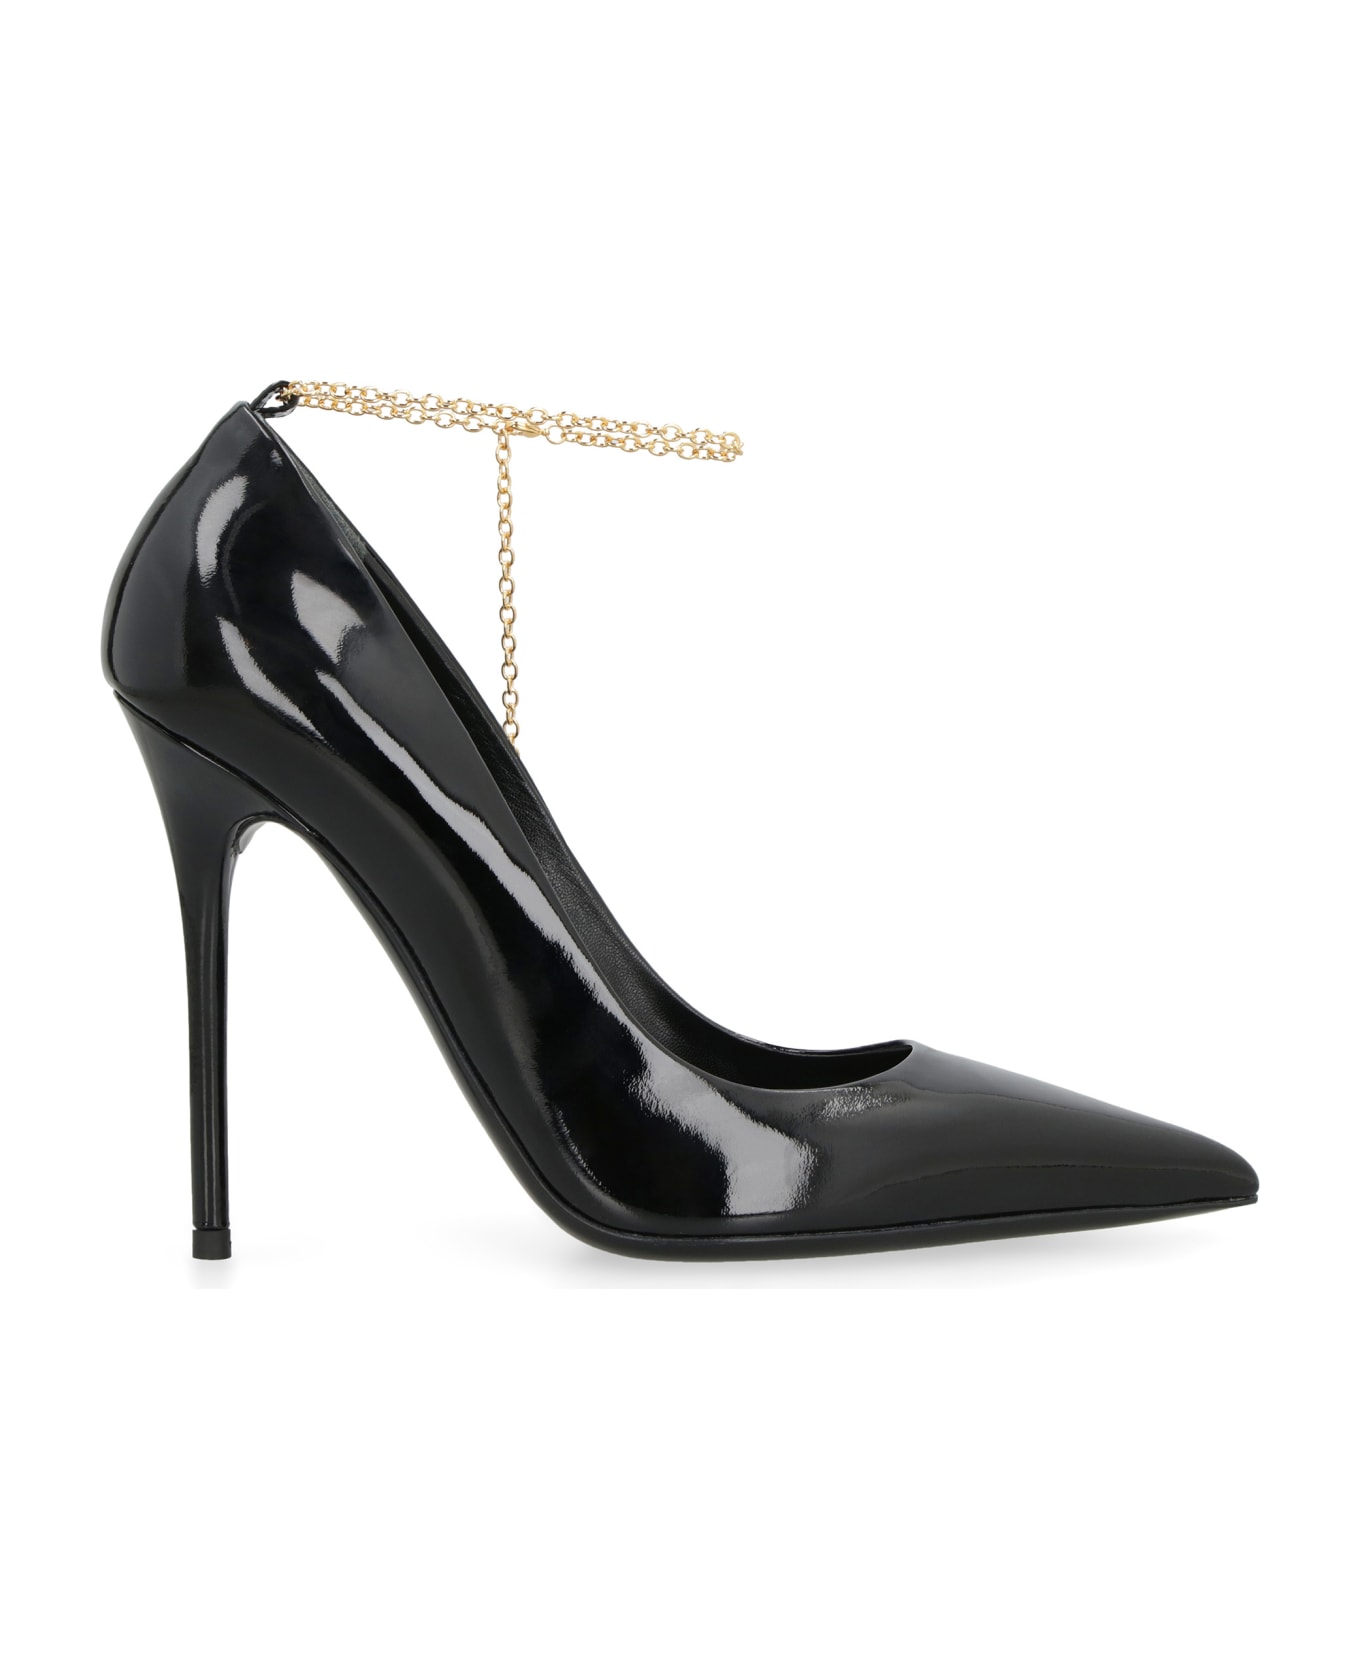 Tom Ford Patent Leather Pumps - black